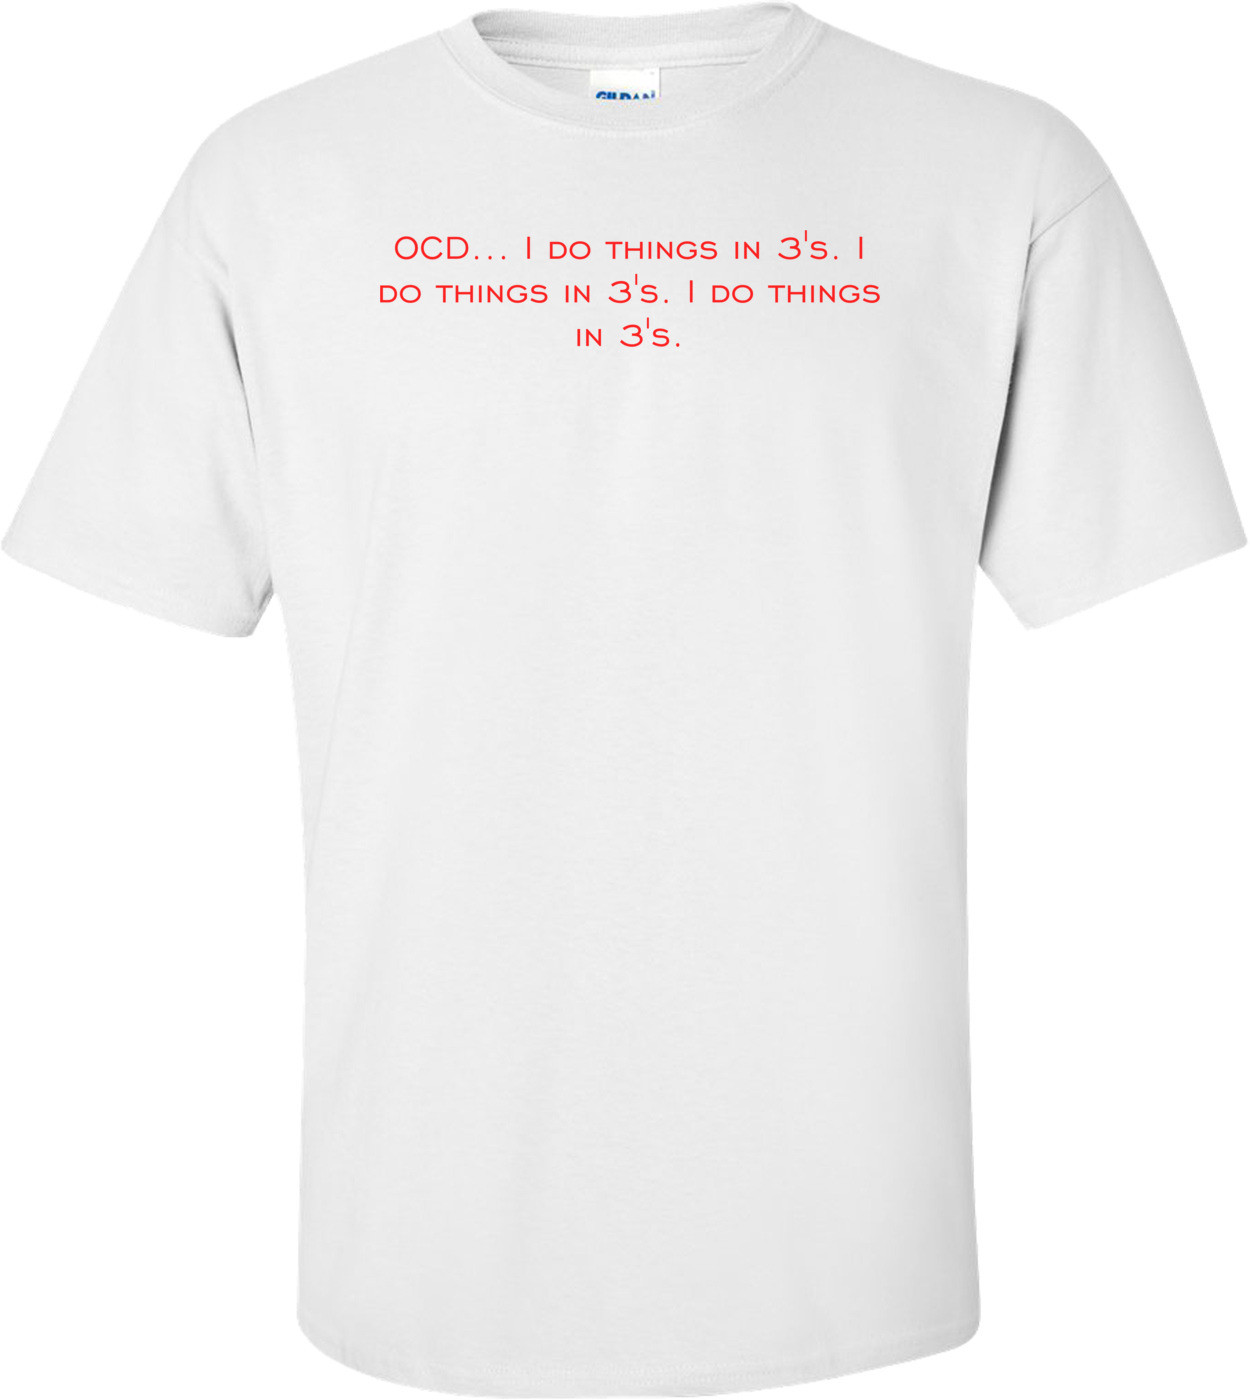 OCD... I do things in 3's. I do things in 3's. I do things in 3's. Shirt